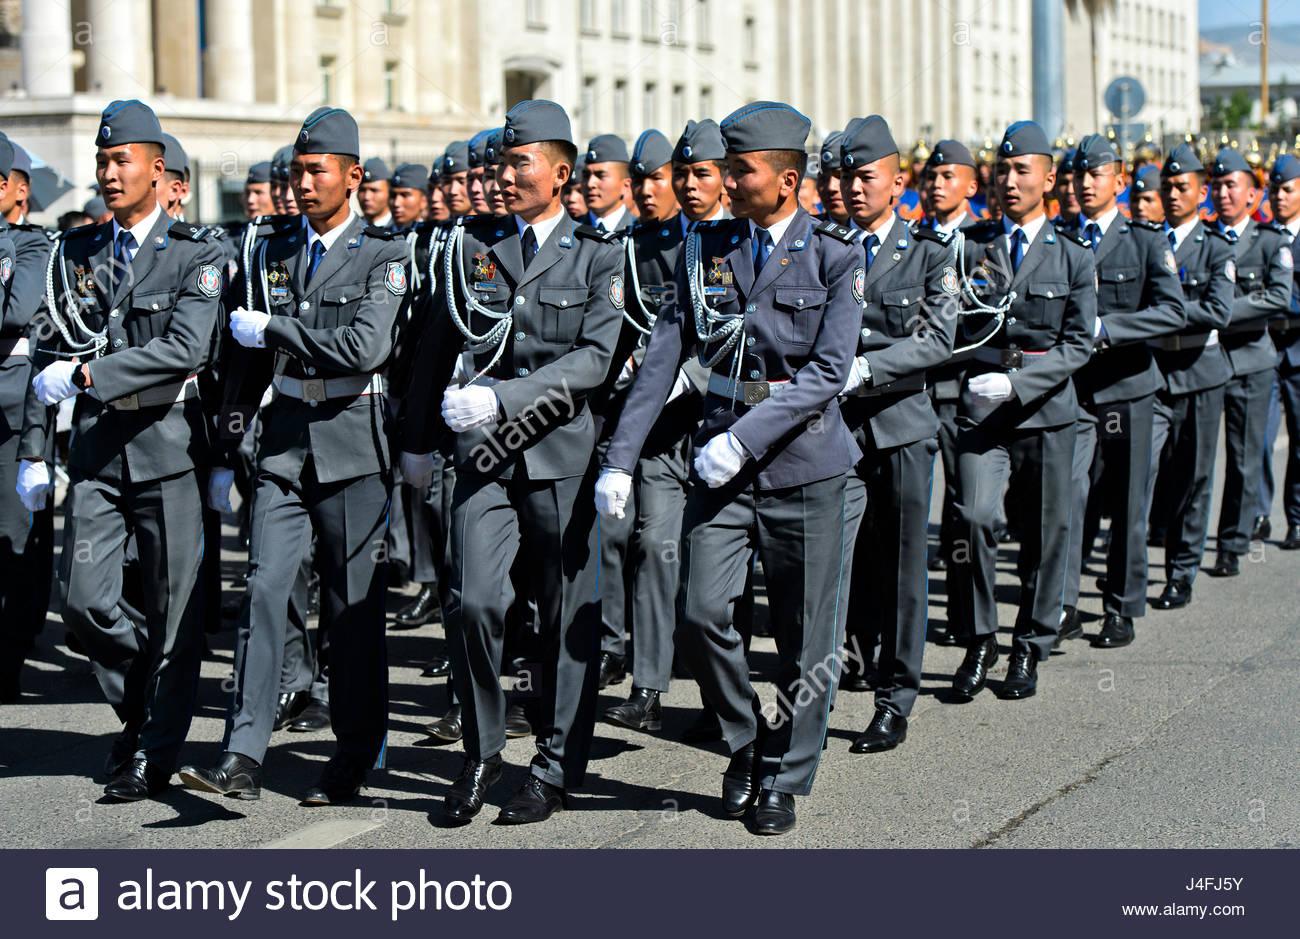 military-unit-of-the-mongolian-armed-forces-at-a-parade-ulaanbaatar-J4FJ5Y.jpg